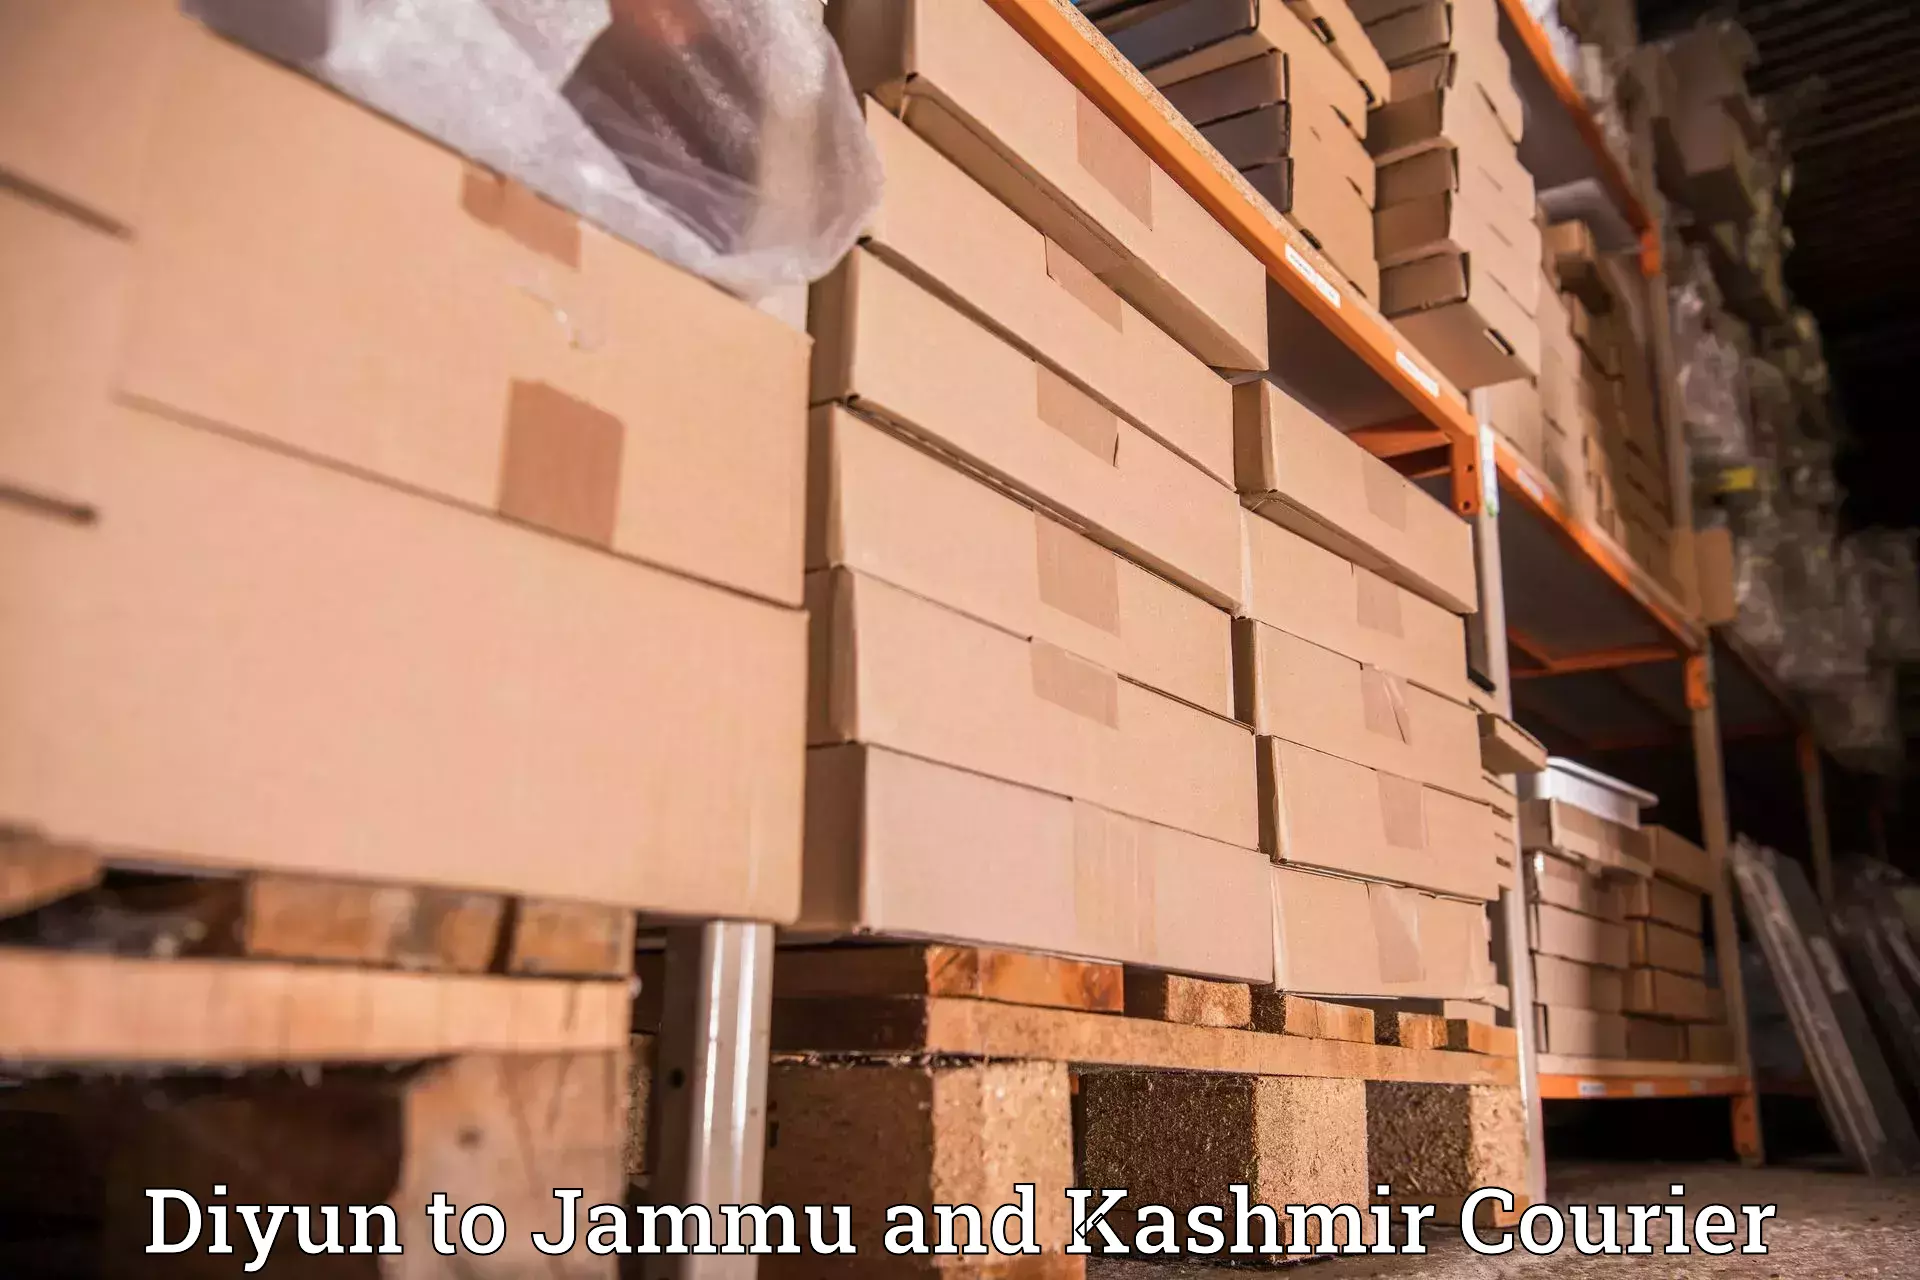 Parcel handling and care Diyun to Sopore